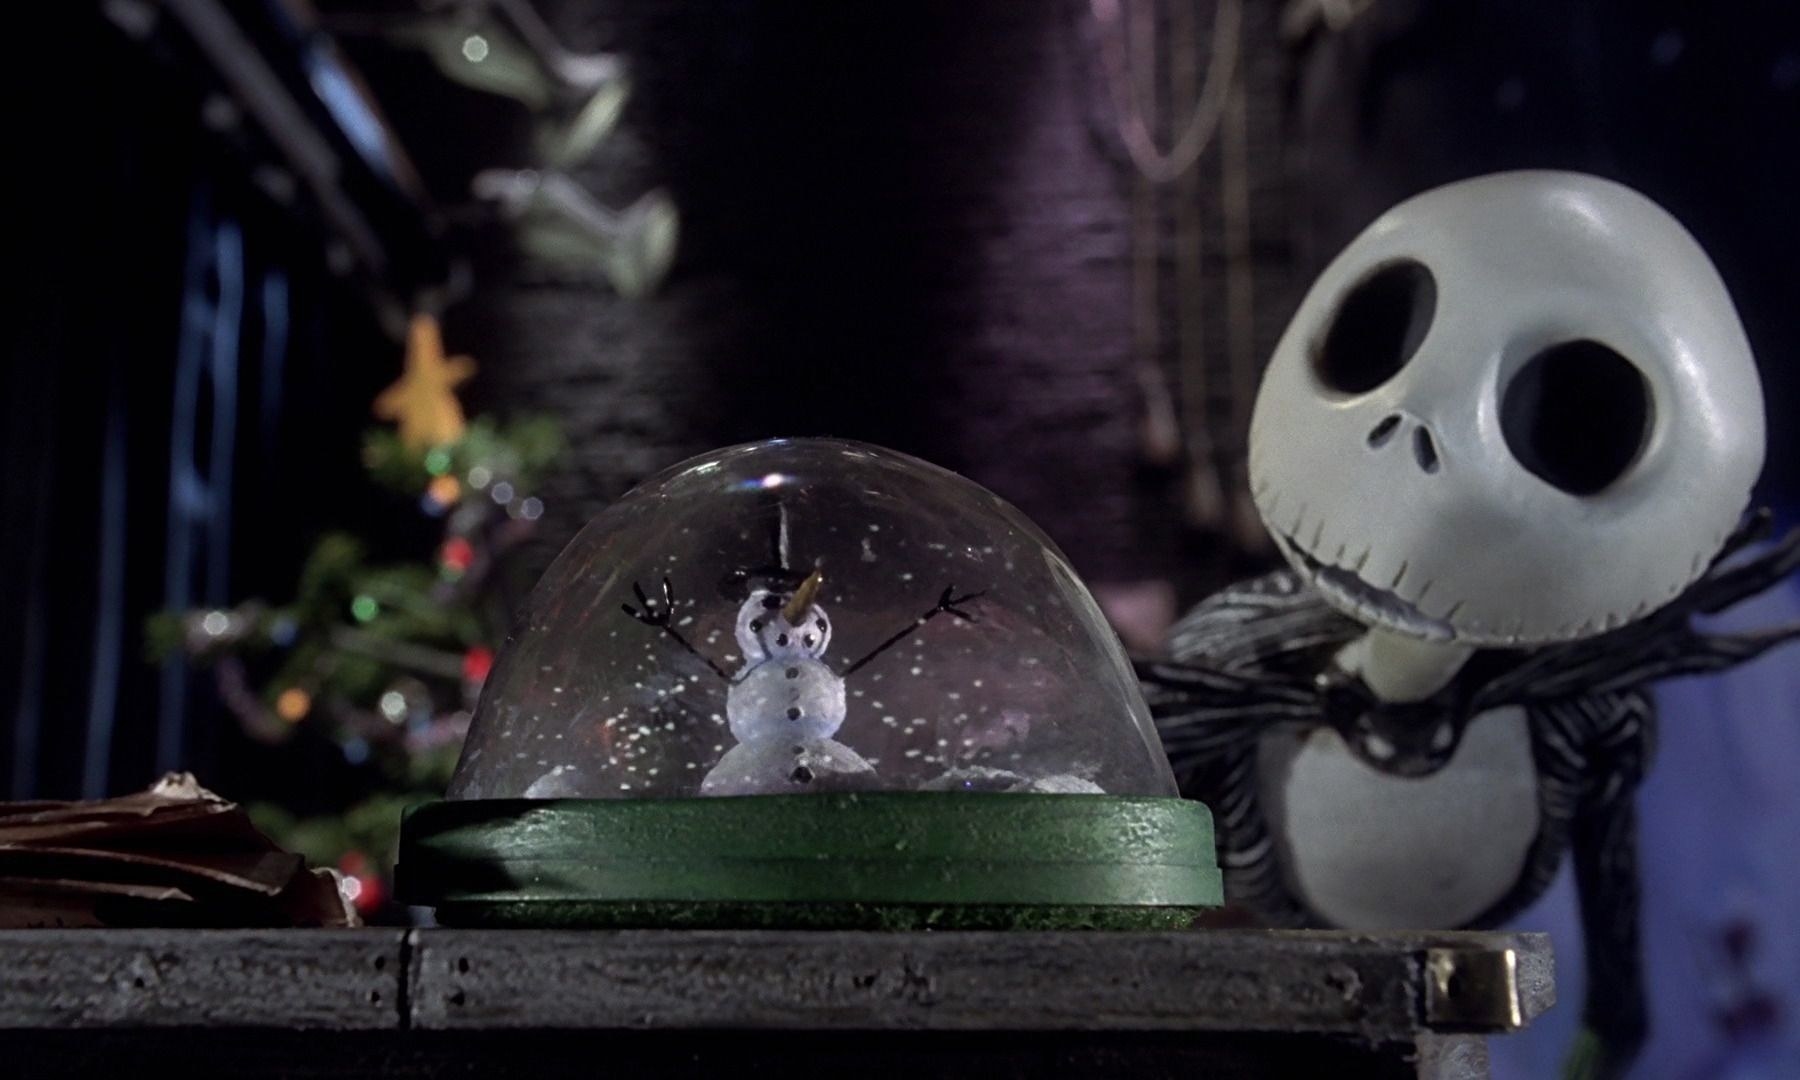 20 facts you might not know about The Nightmare Before Christmas